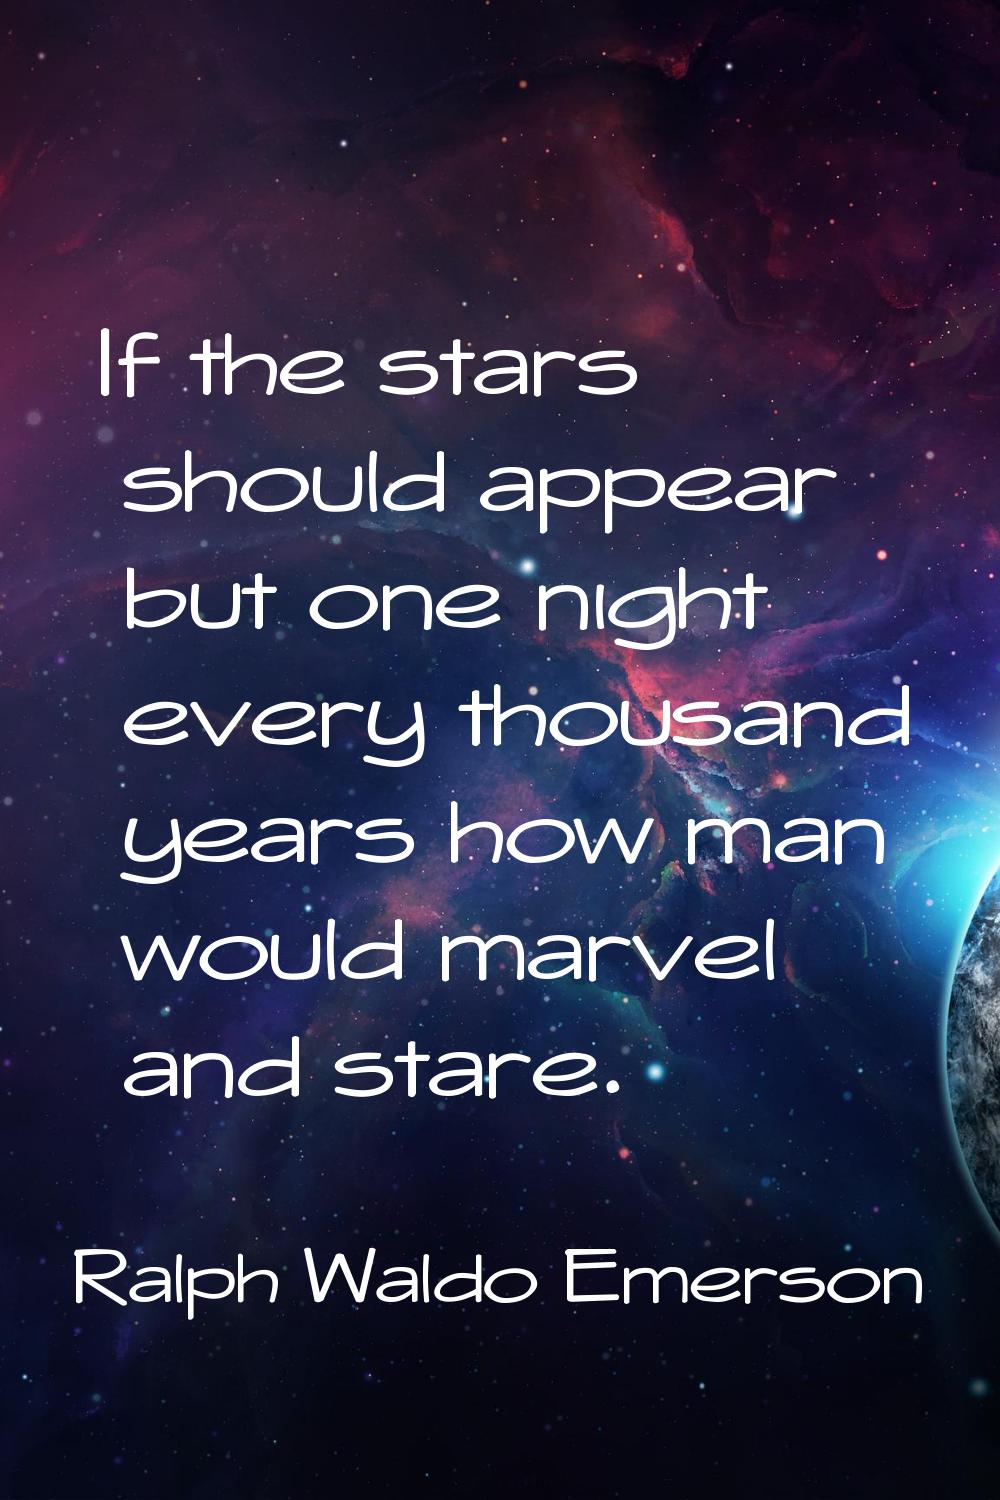 If the stars should appear but one night every thousand years how man would marvel and stare.